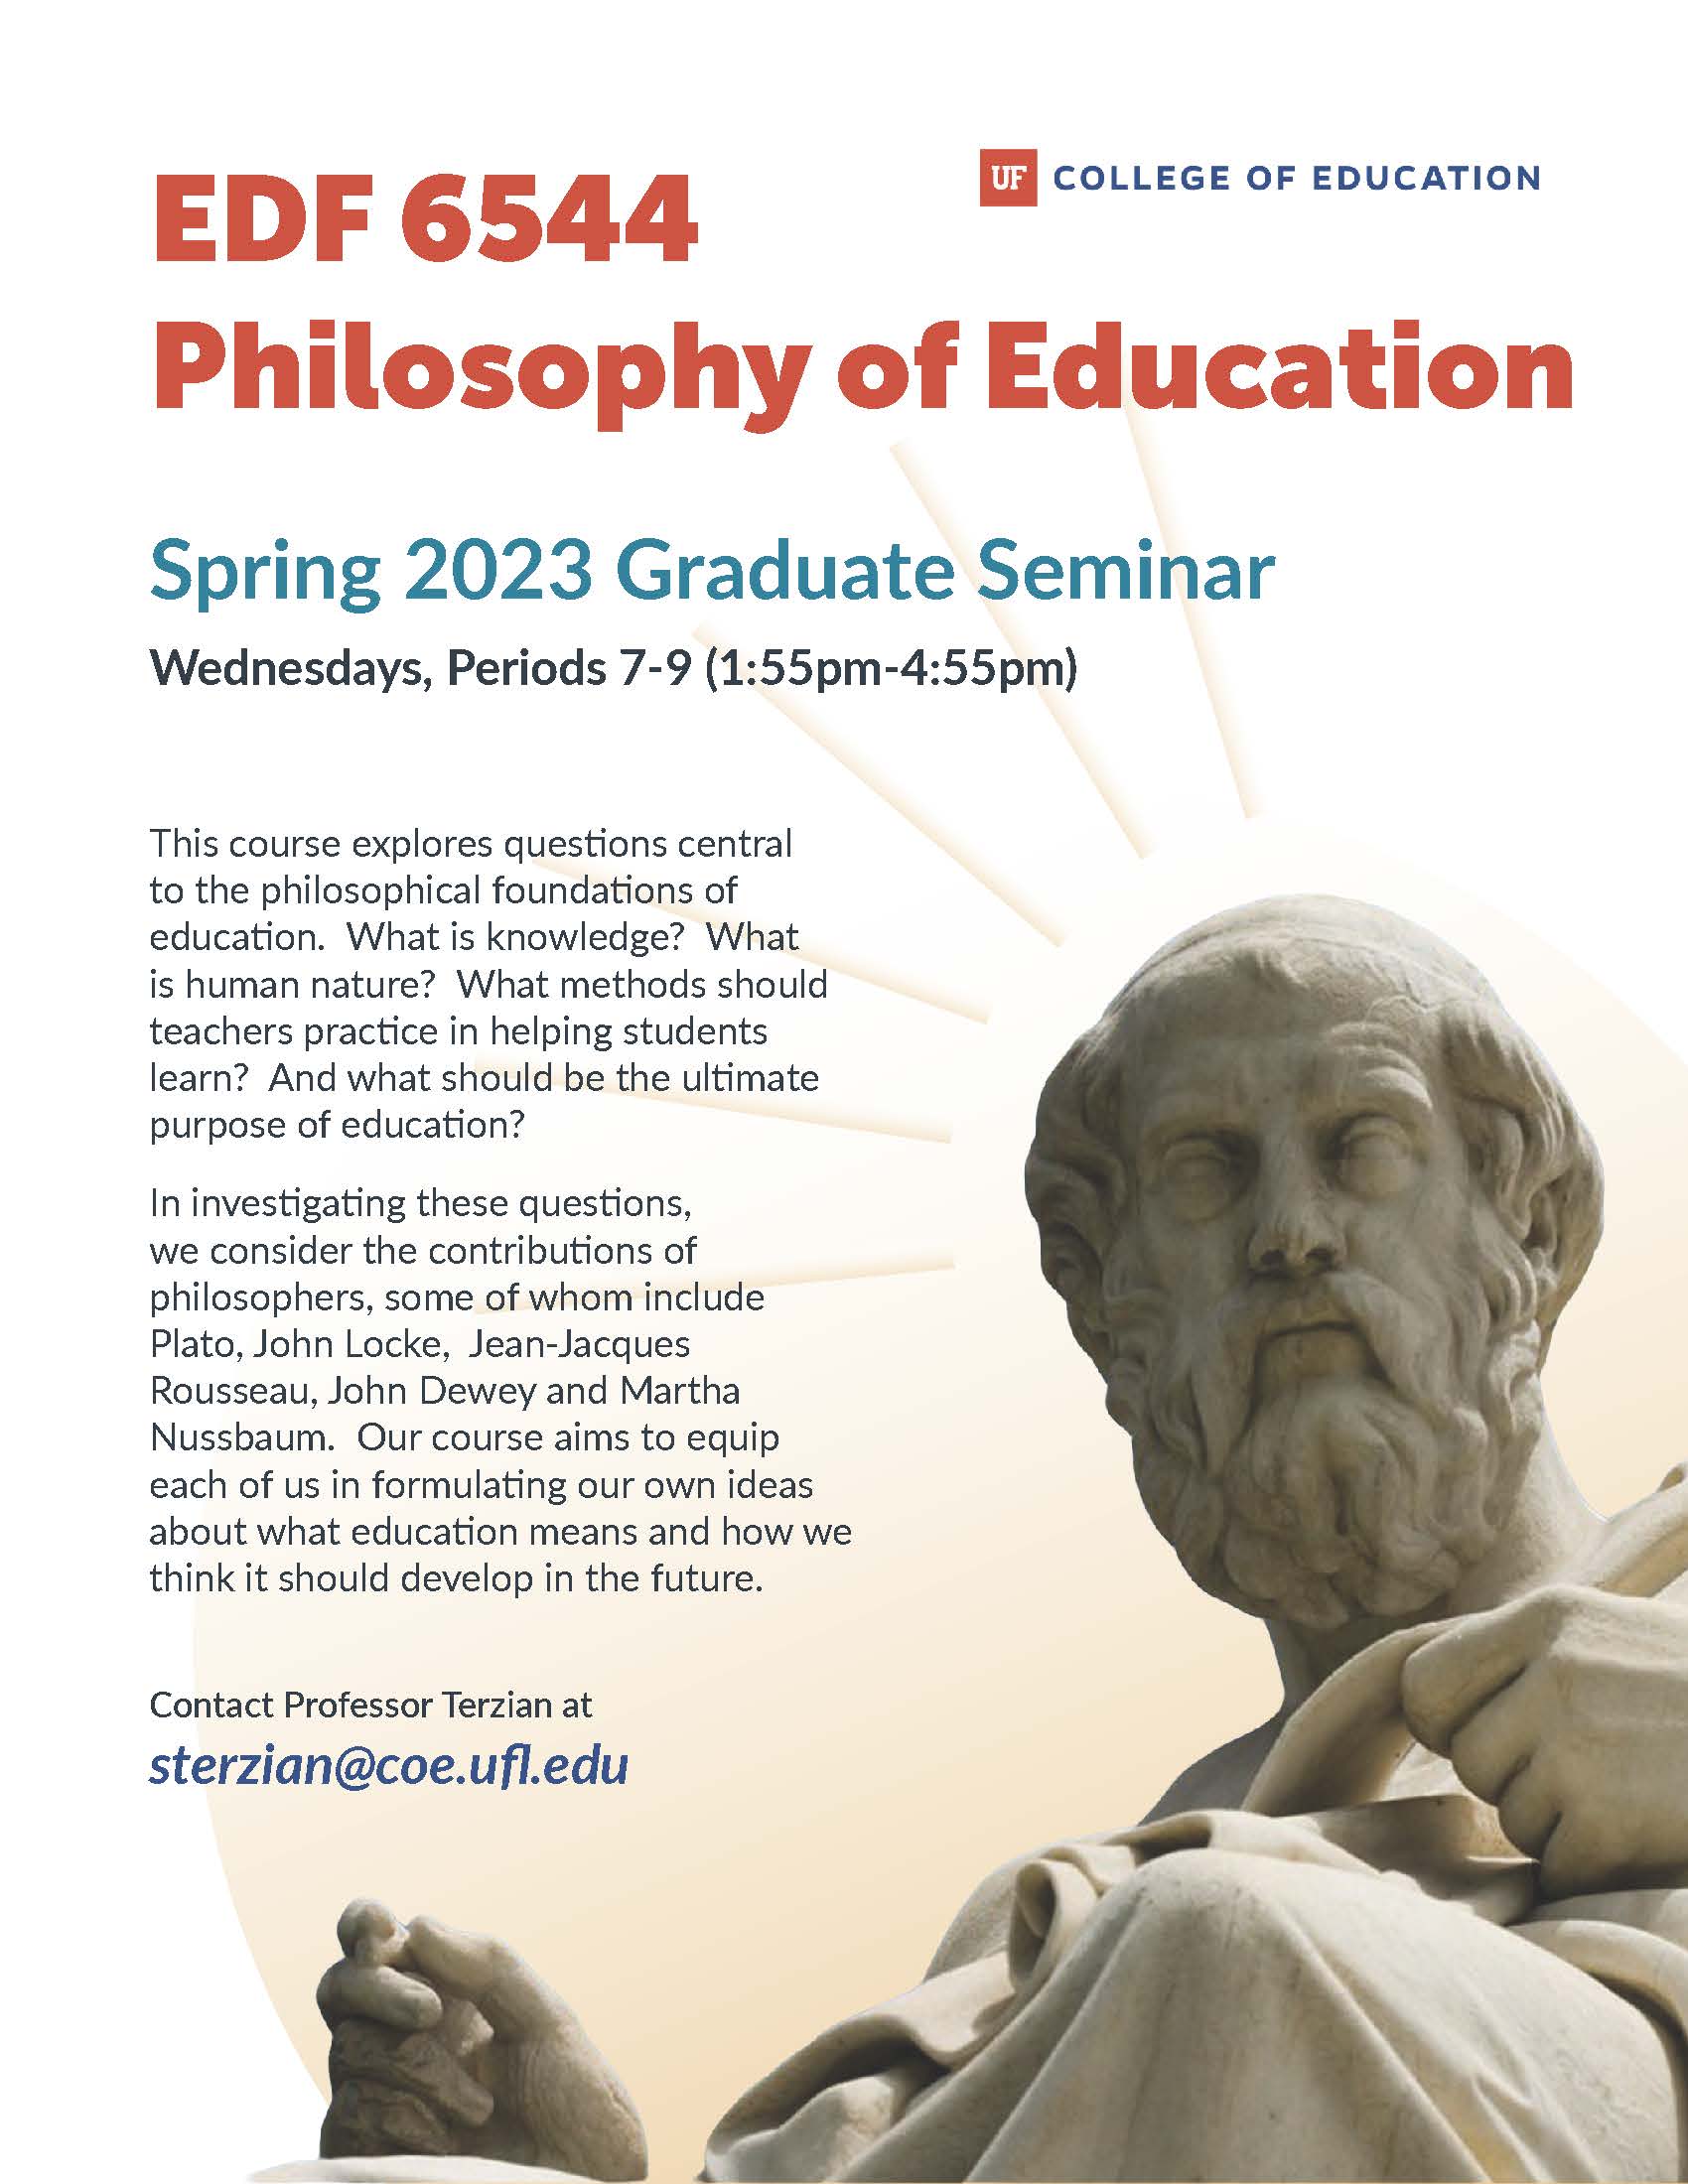 A flyer for EDF 6544 - Philosophy of Education course.